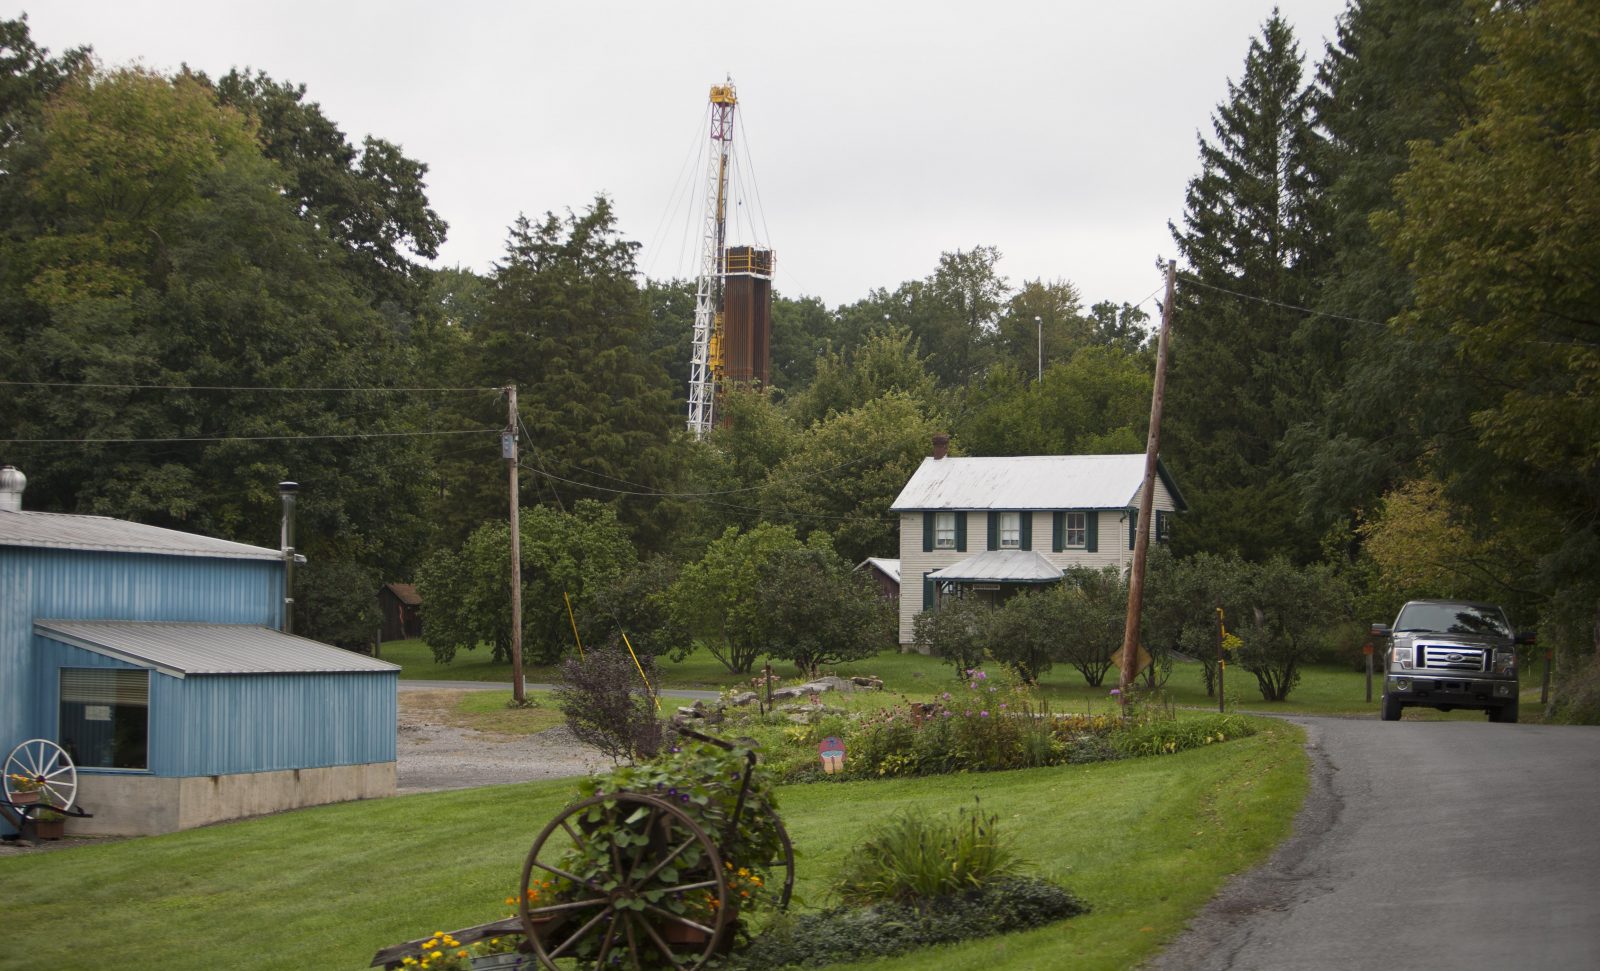 Drilling Rig On Private Property in Rural Calvert, Pennsylvania